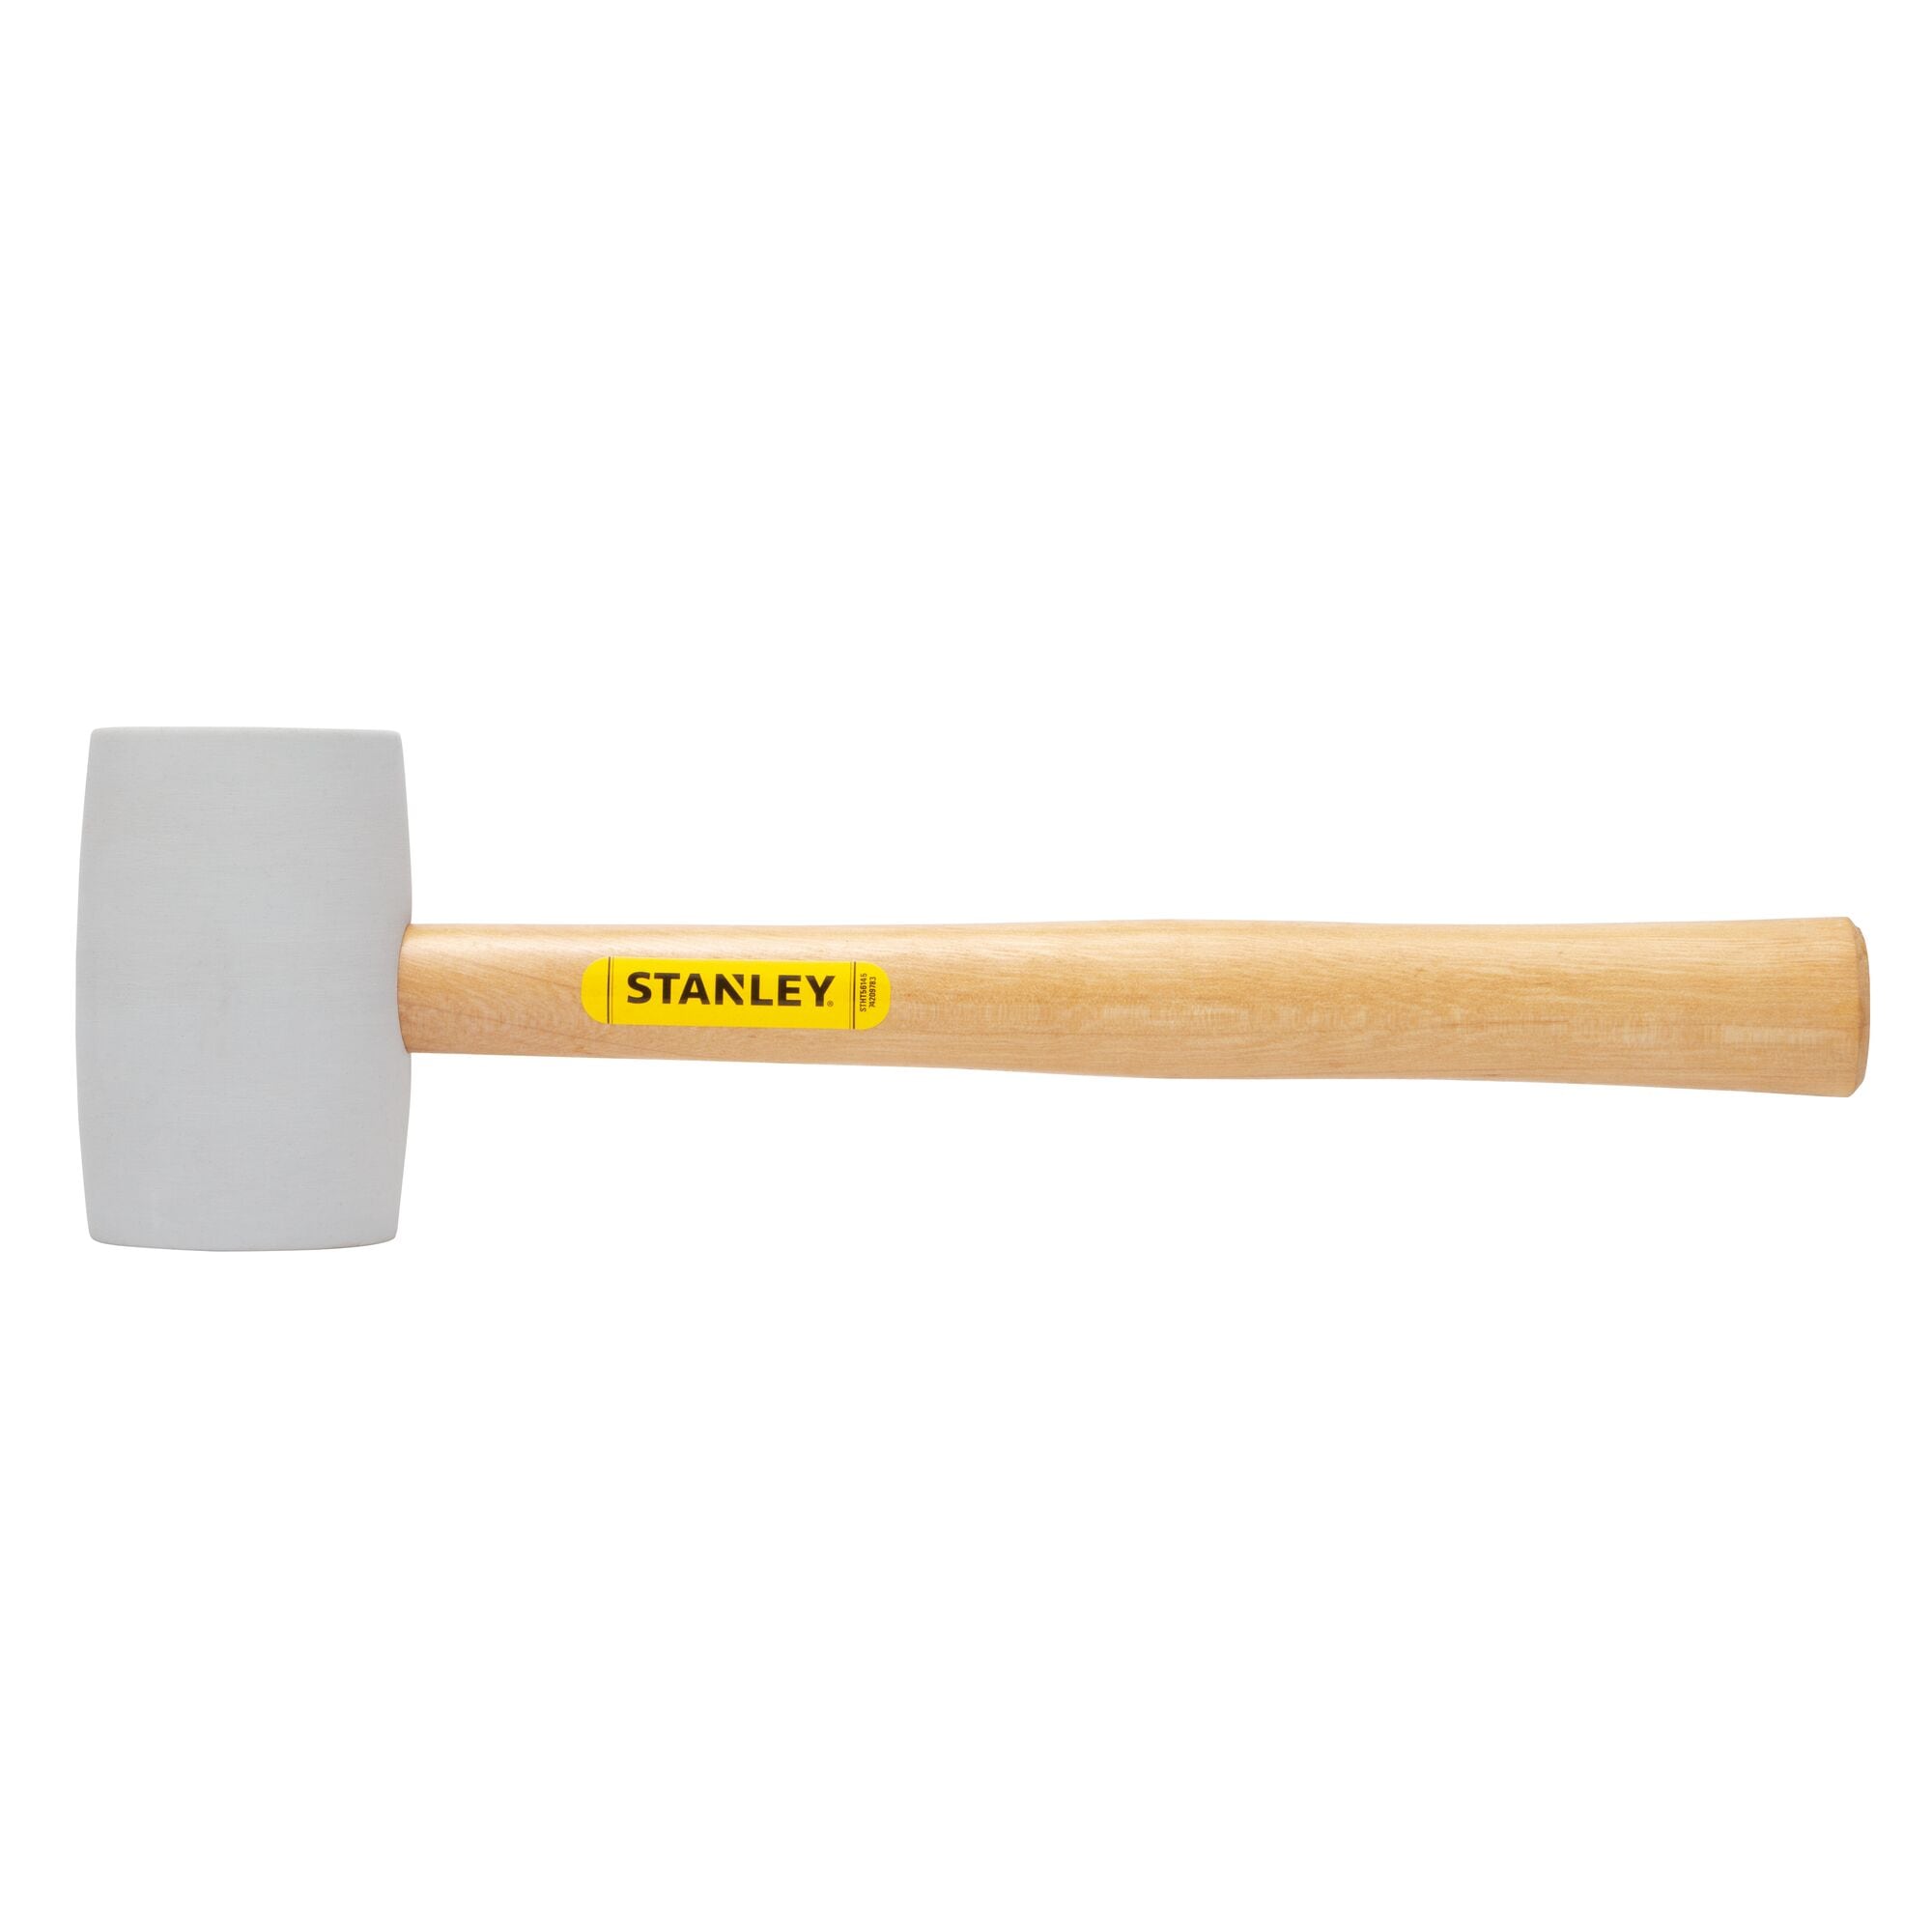 1 KG Double Face Sledge Lump Hammer Wooden Handle Shaft 2.2lbs 